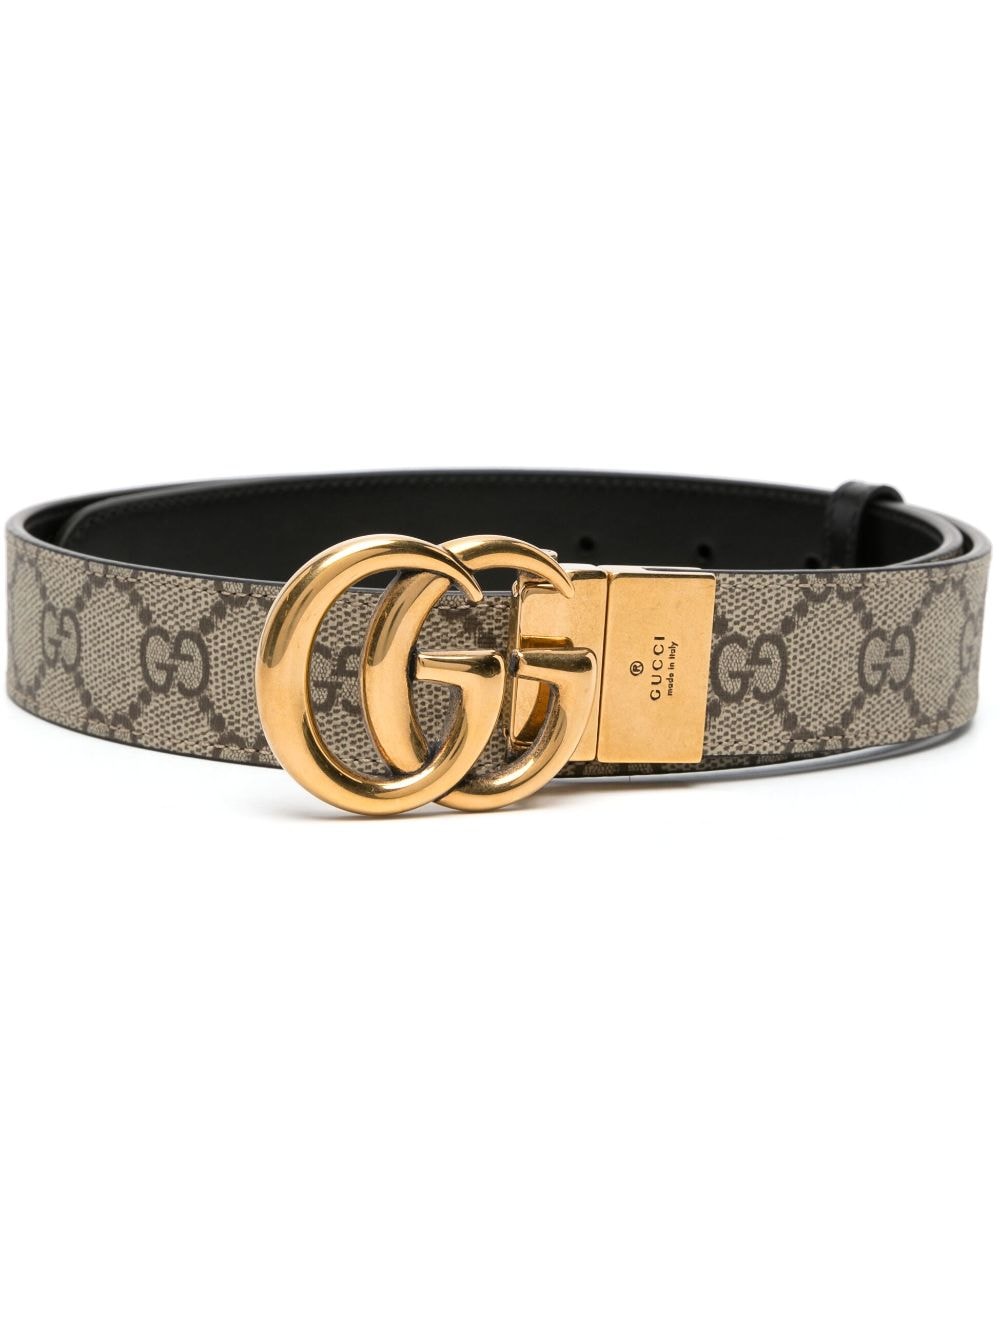 Image 1 of Gucci GG Marmont reversible belt